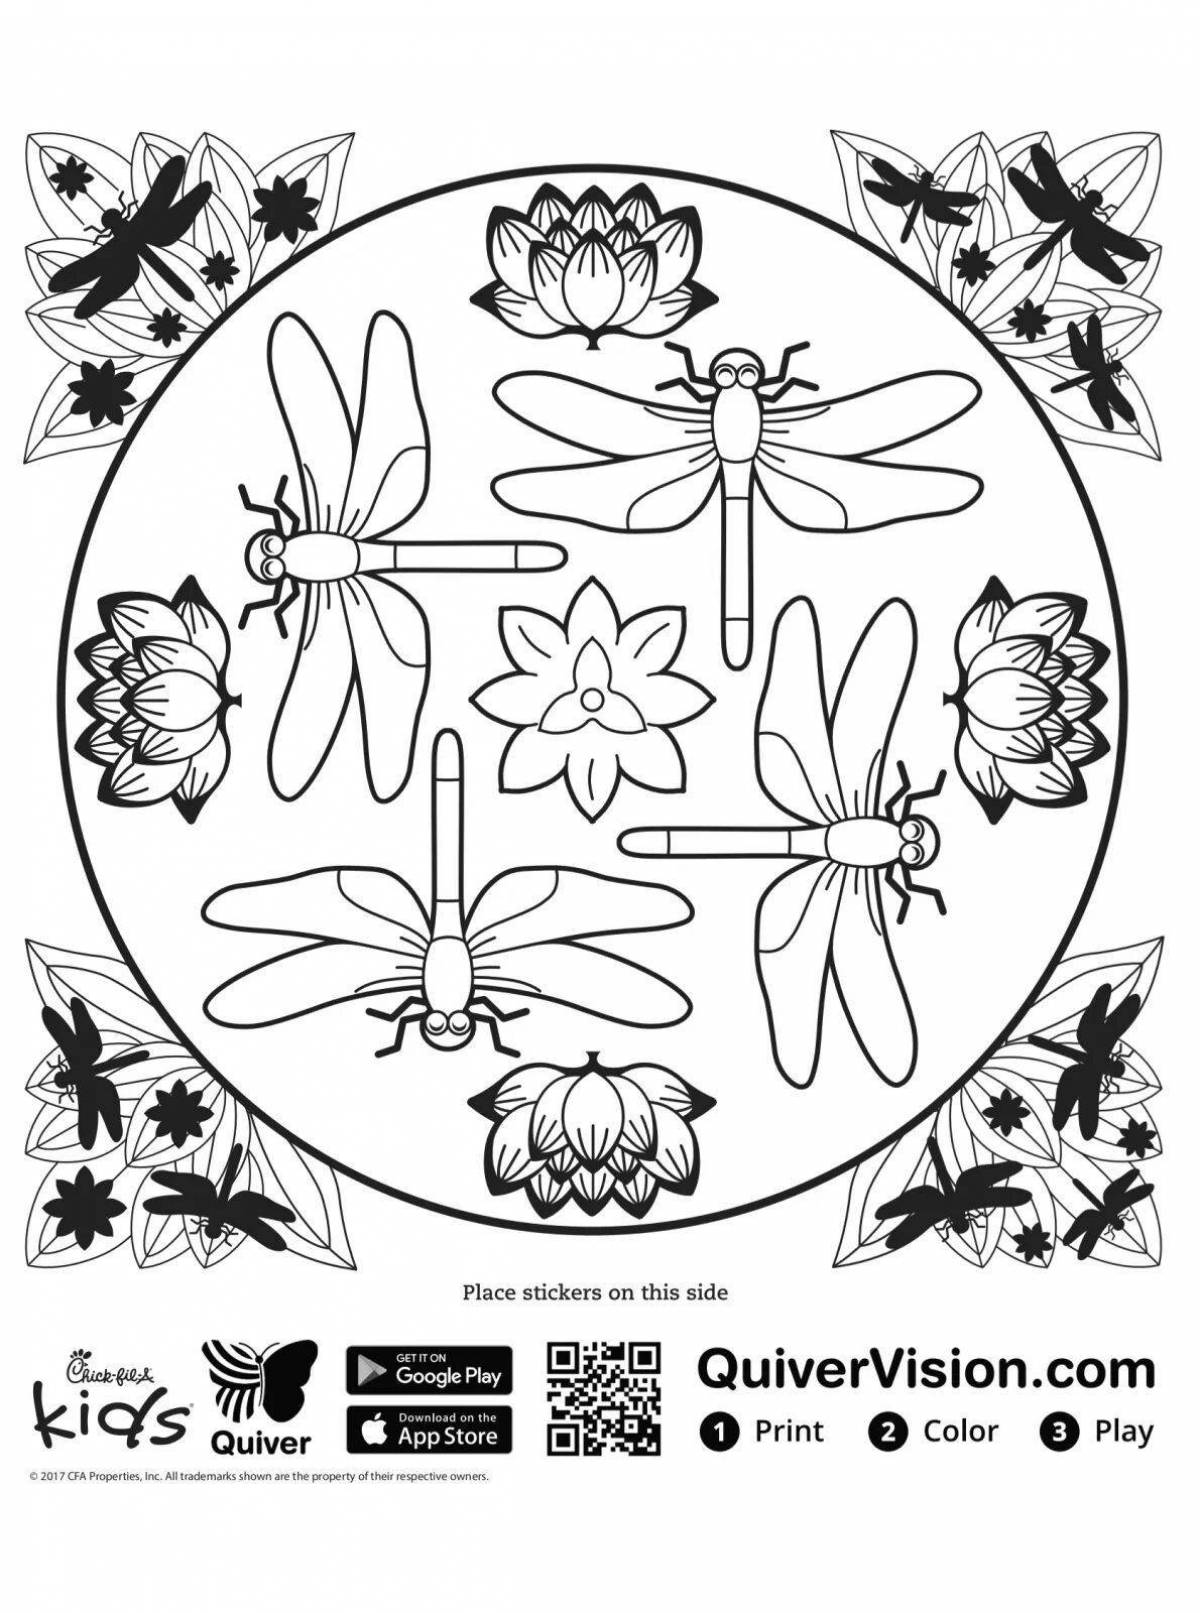 Colorful quivervision coloring page